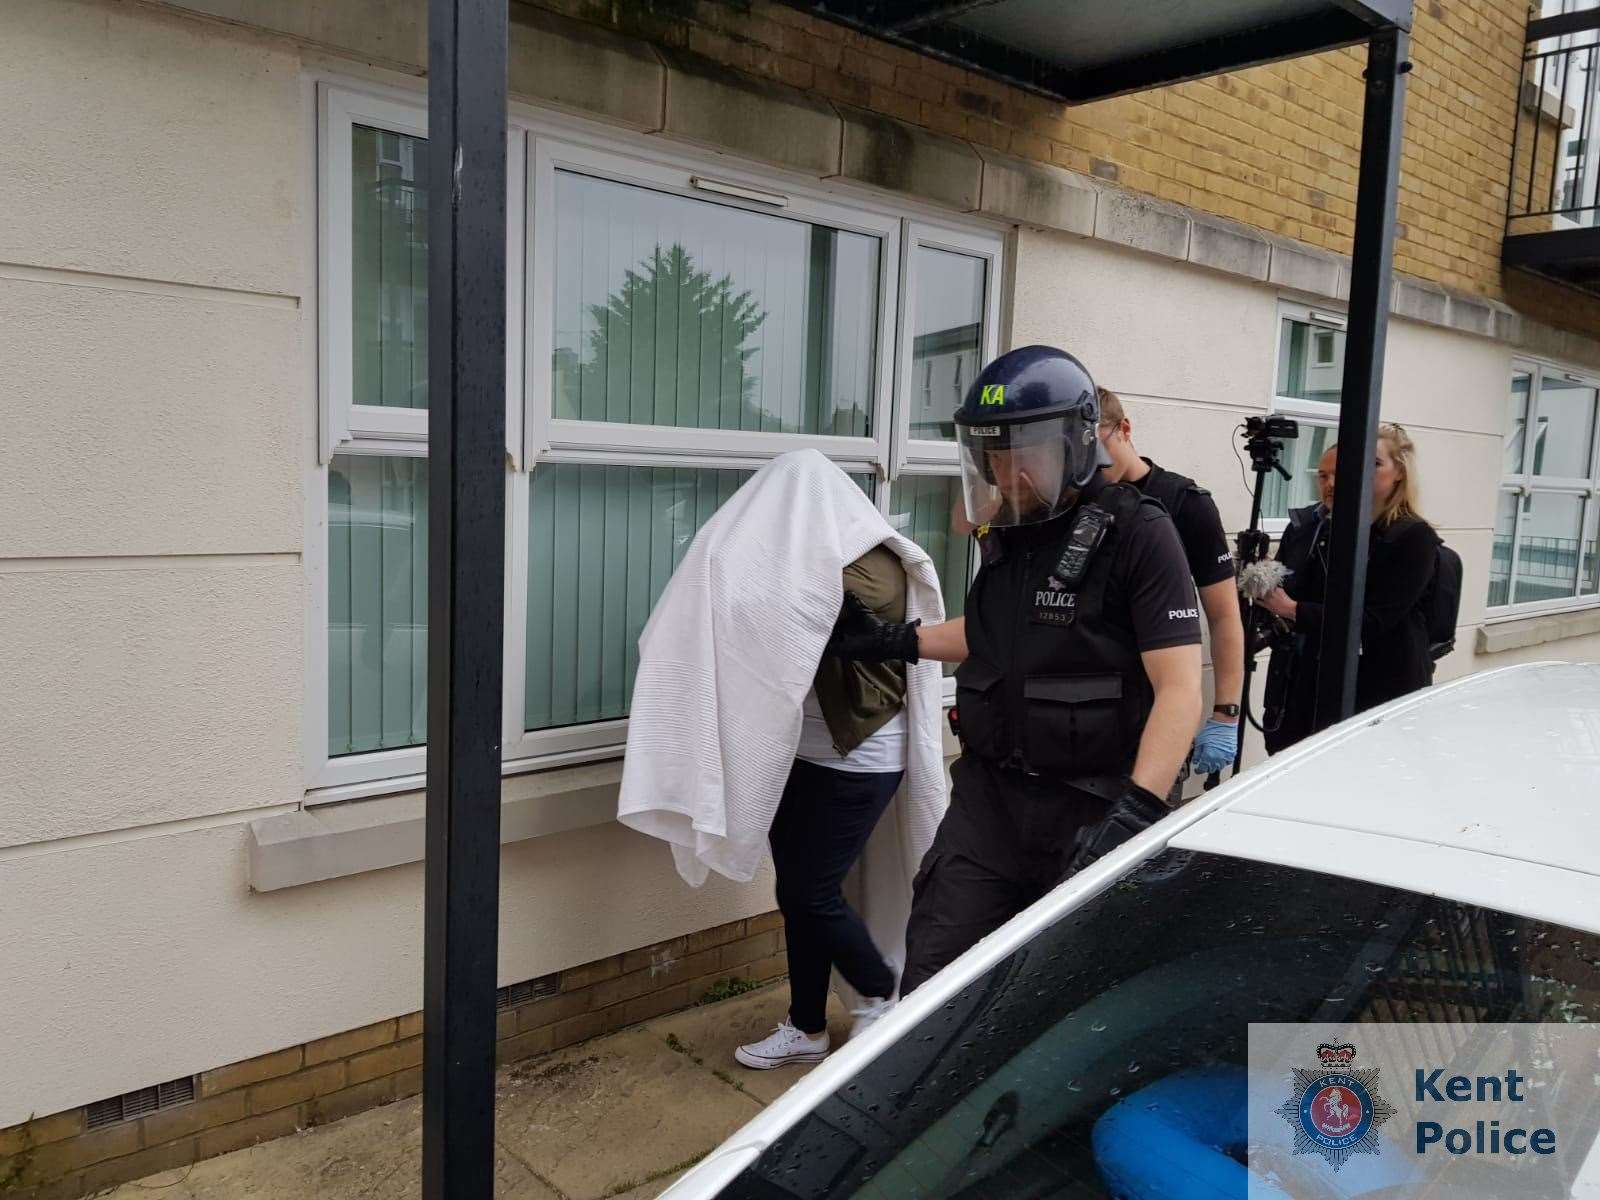 Police arrested two people in Maidstone after a series of dawn raids this morning (12648331)